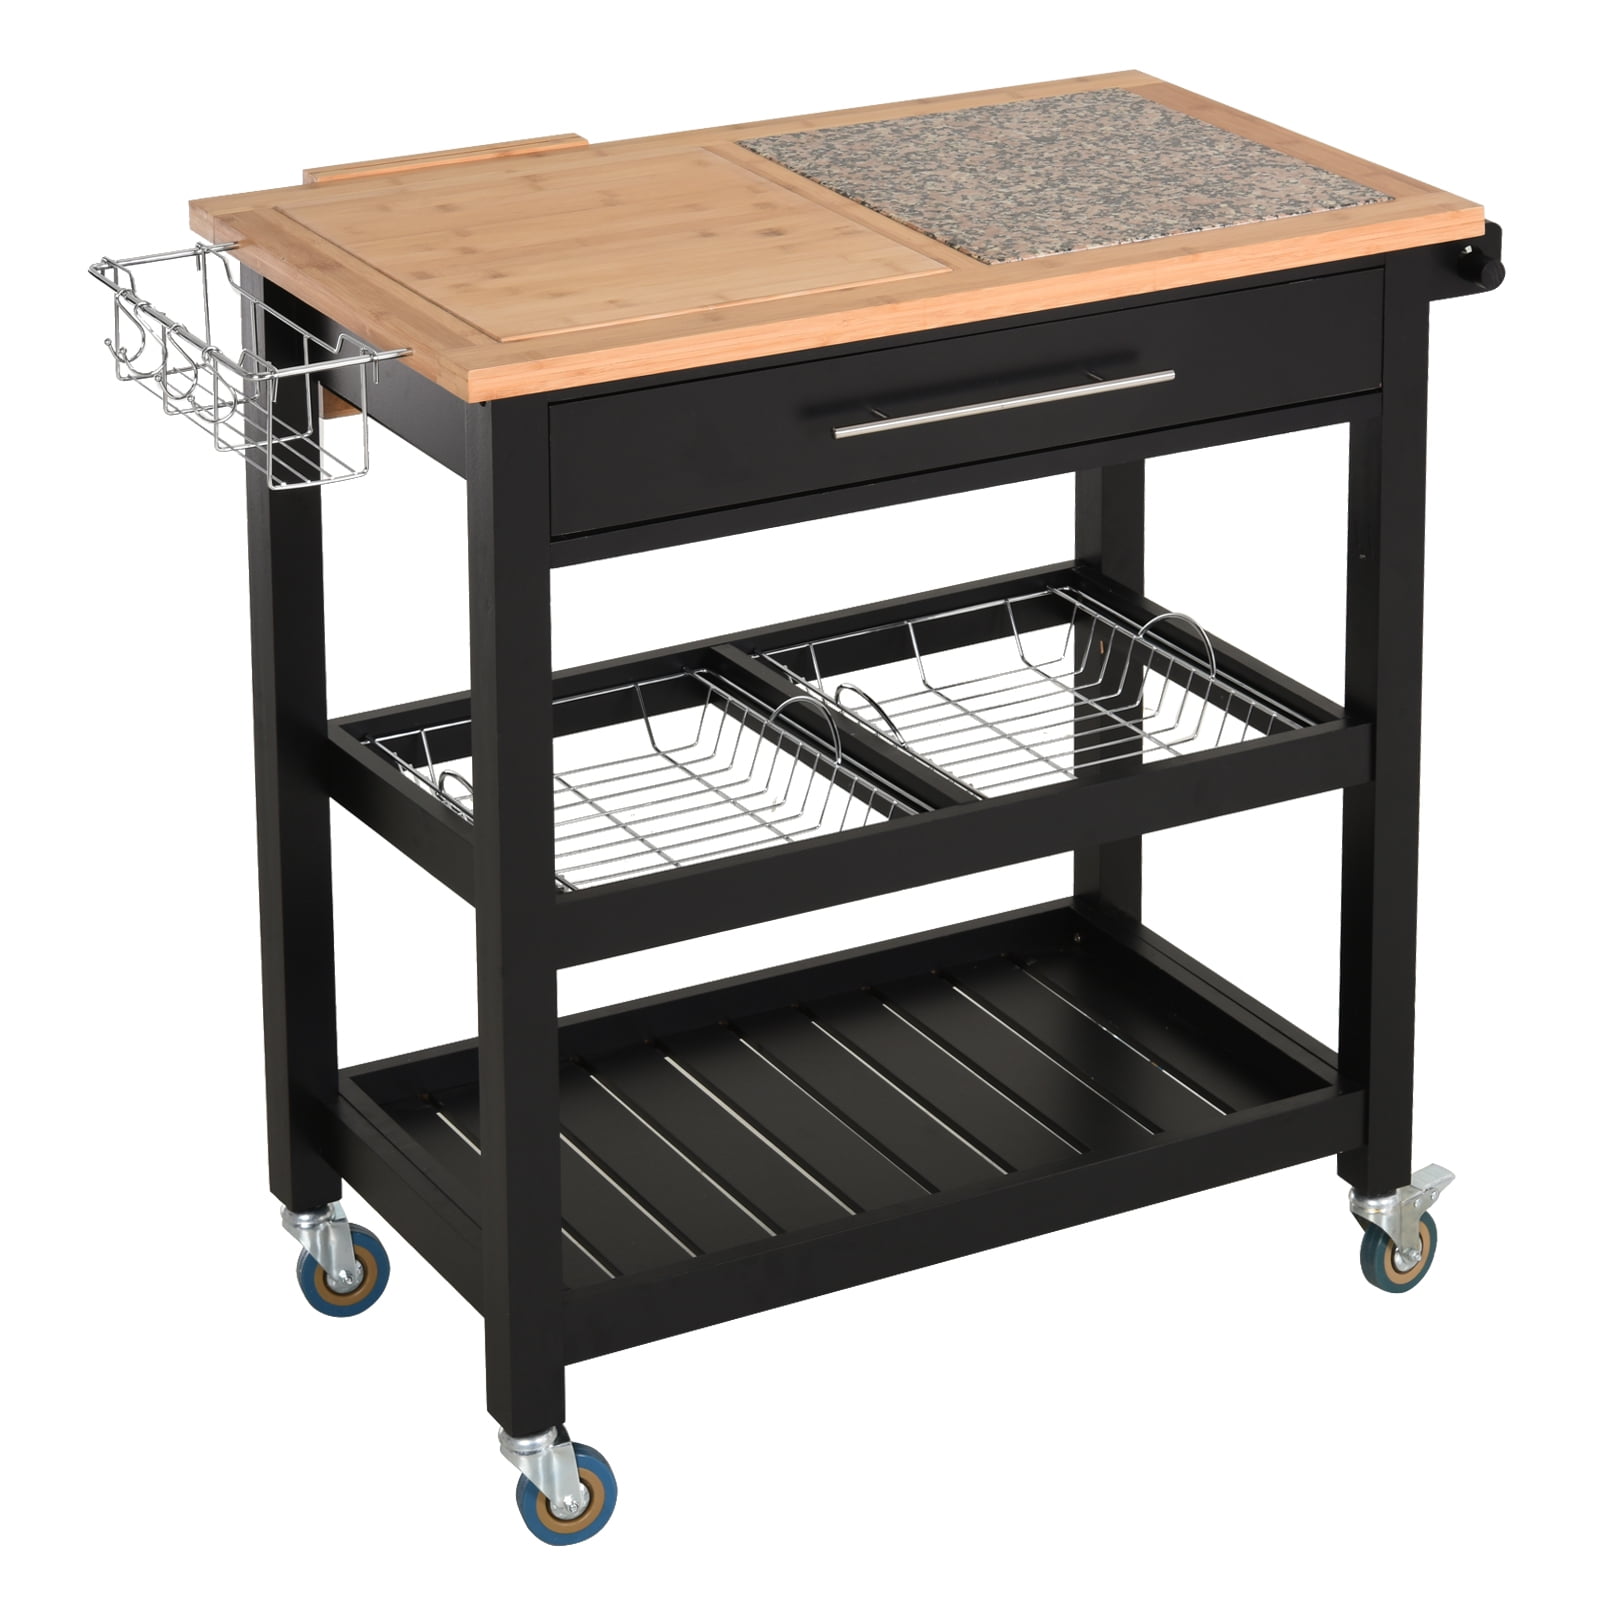 HomCom Rolling Mobile Kitchen Island Cart with Large Work Countertop